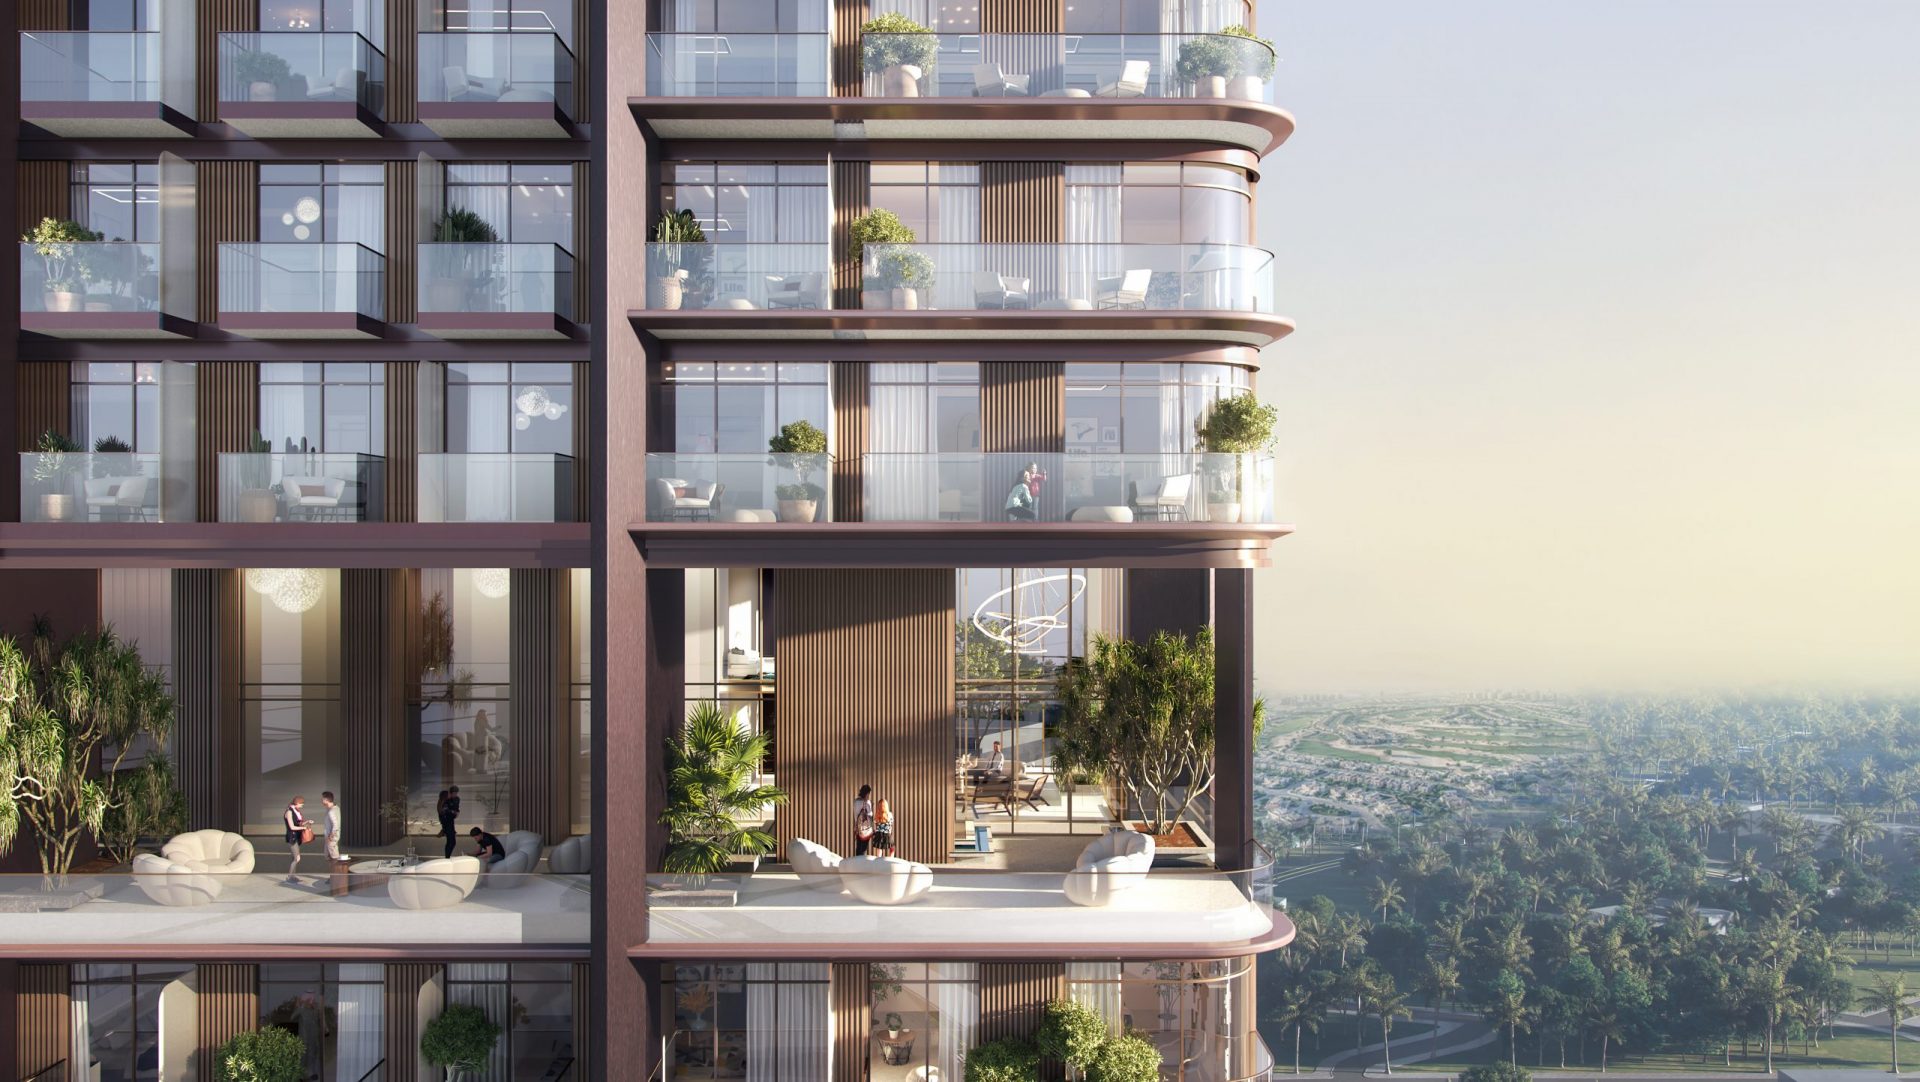 Working closely with Imitaz Developments, RMJM Dubai designed a contemporary residential tower.